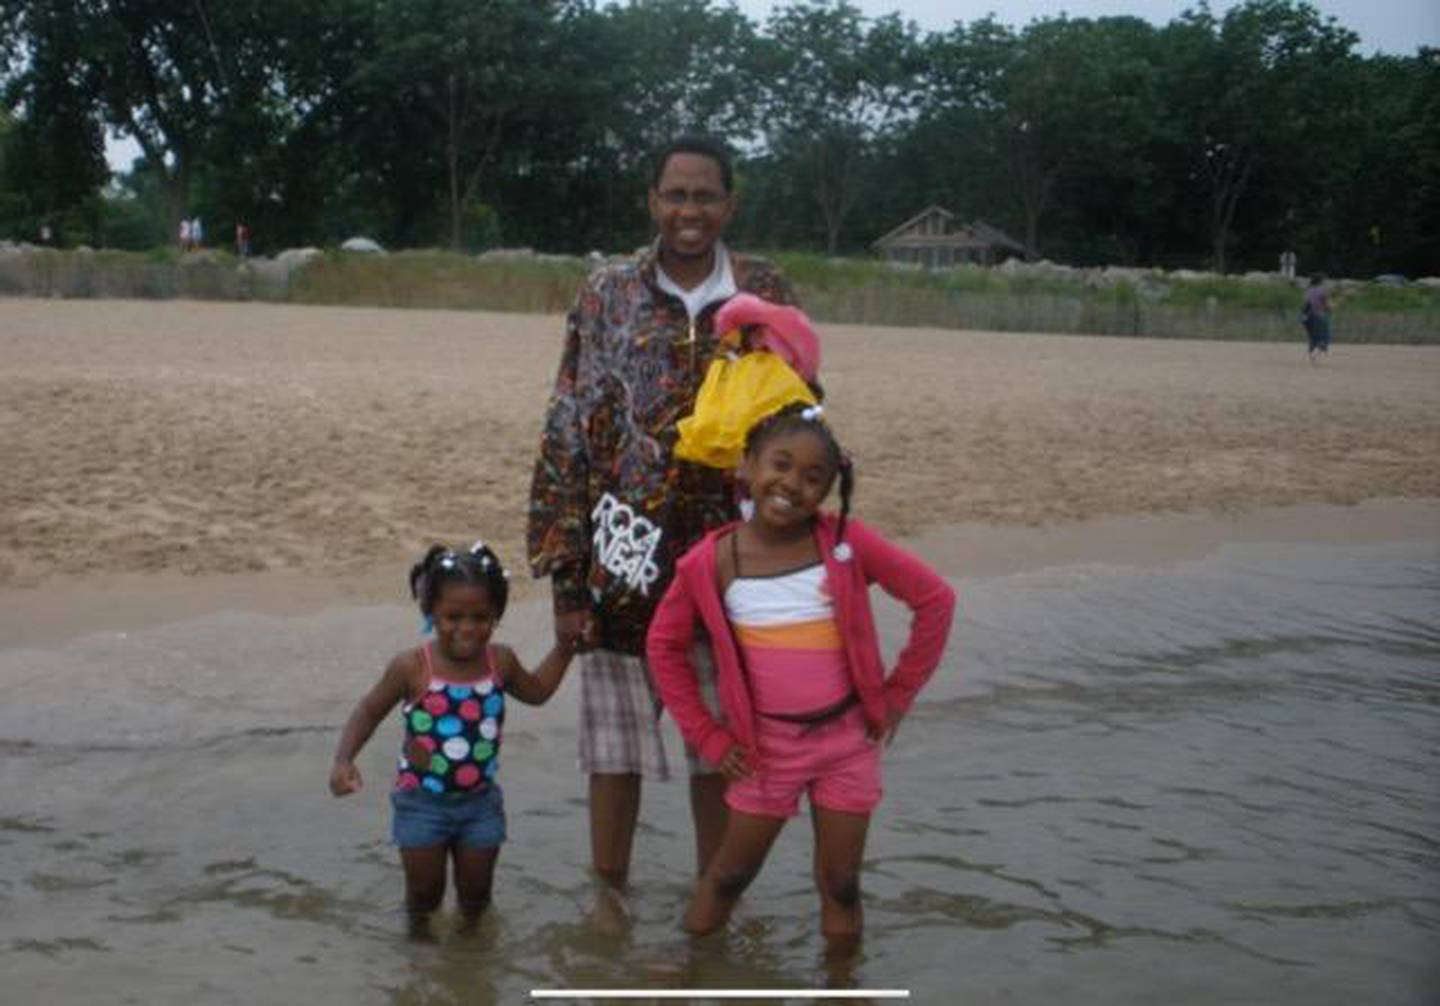 Dykota Morgan, 15, of Bolingbrook was an athlete, artist, activist and scholar. She died of complications from COVID-19 on May 4. Dykota is pictured in her younger years with her father Rashad Bingham and her older sister Dyman.